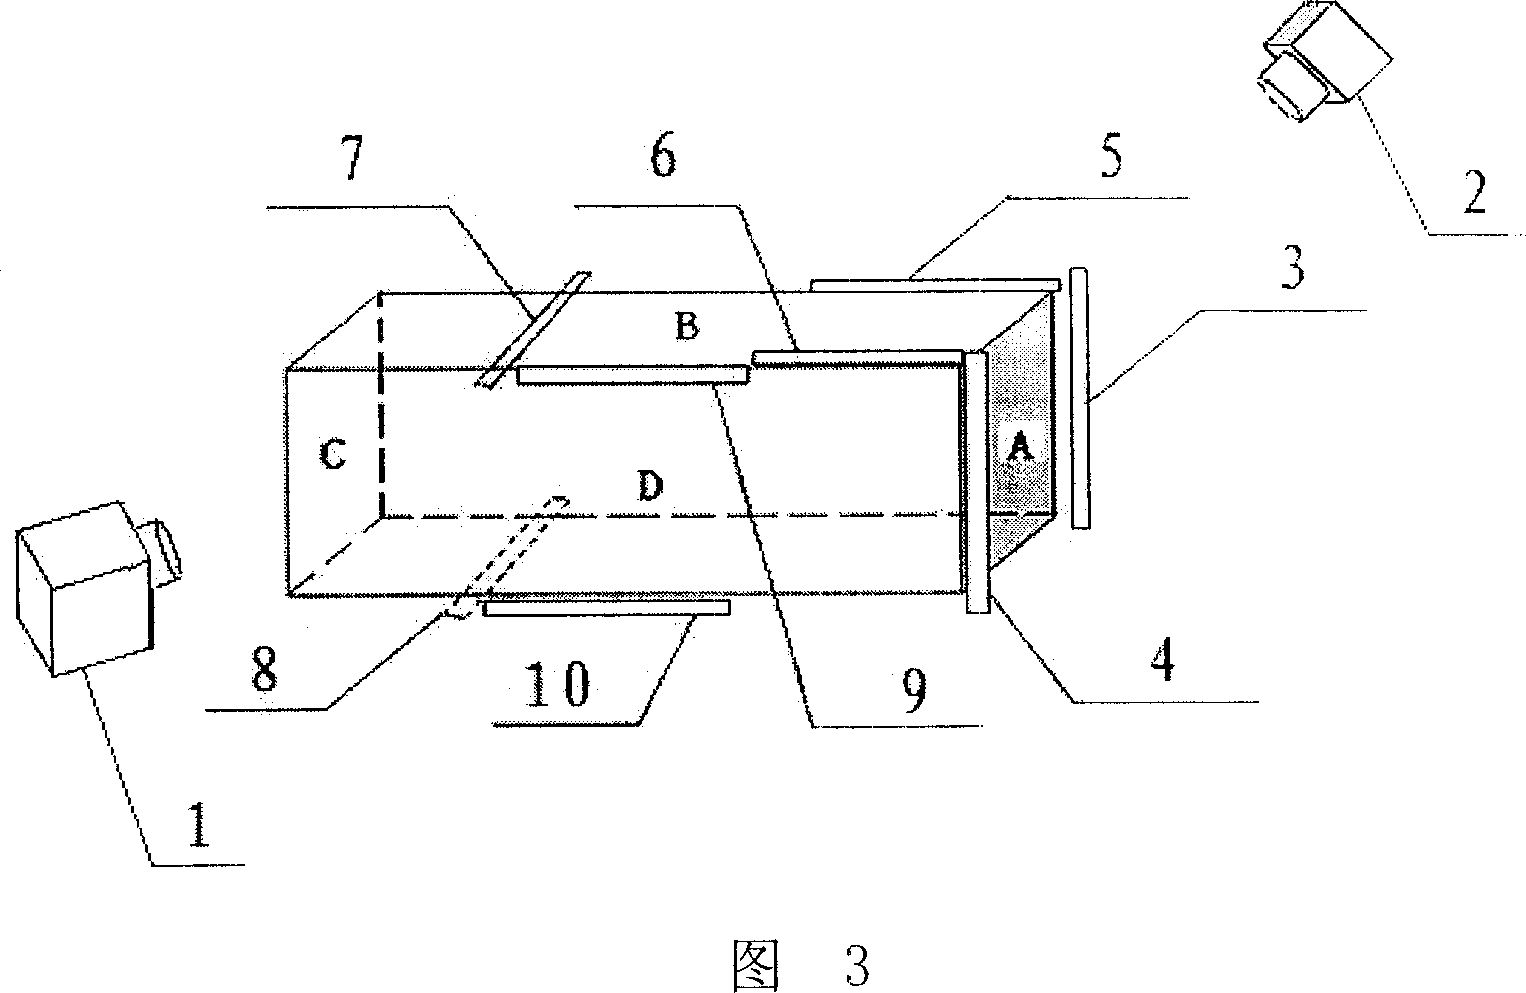 Light source configuration method for online detecting system of stip cigarette packing quality